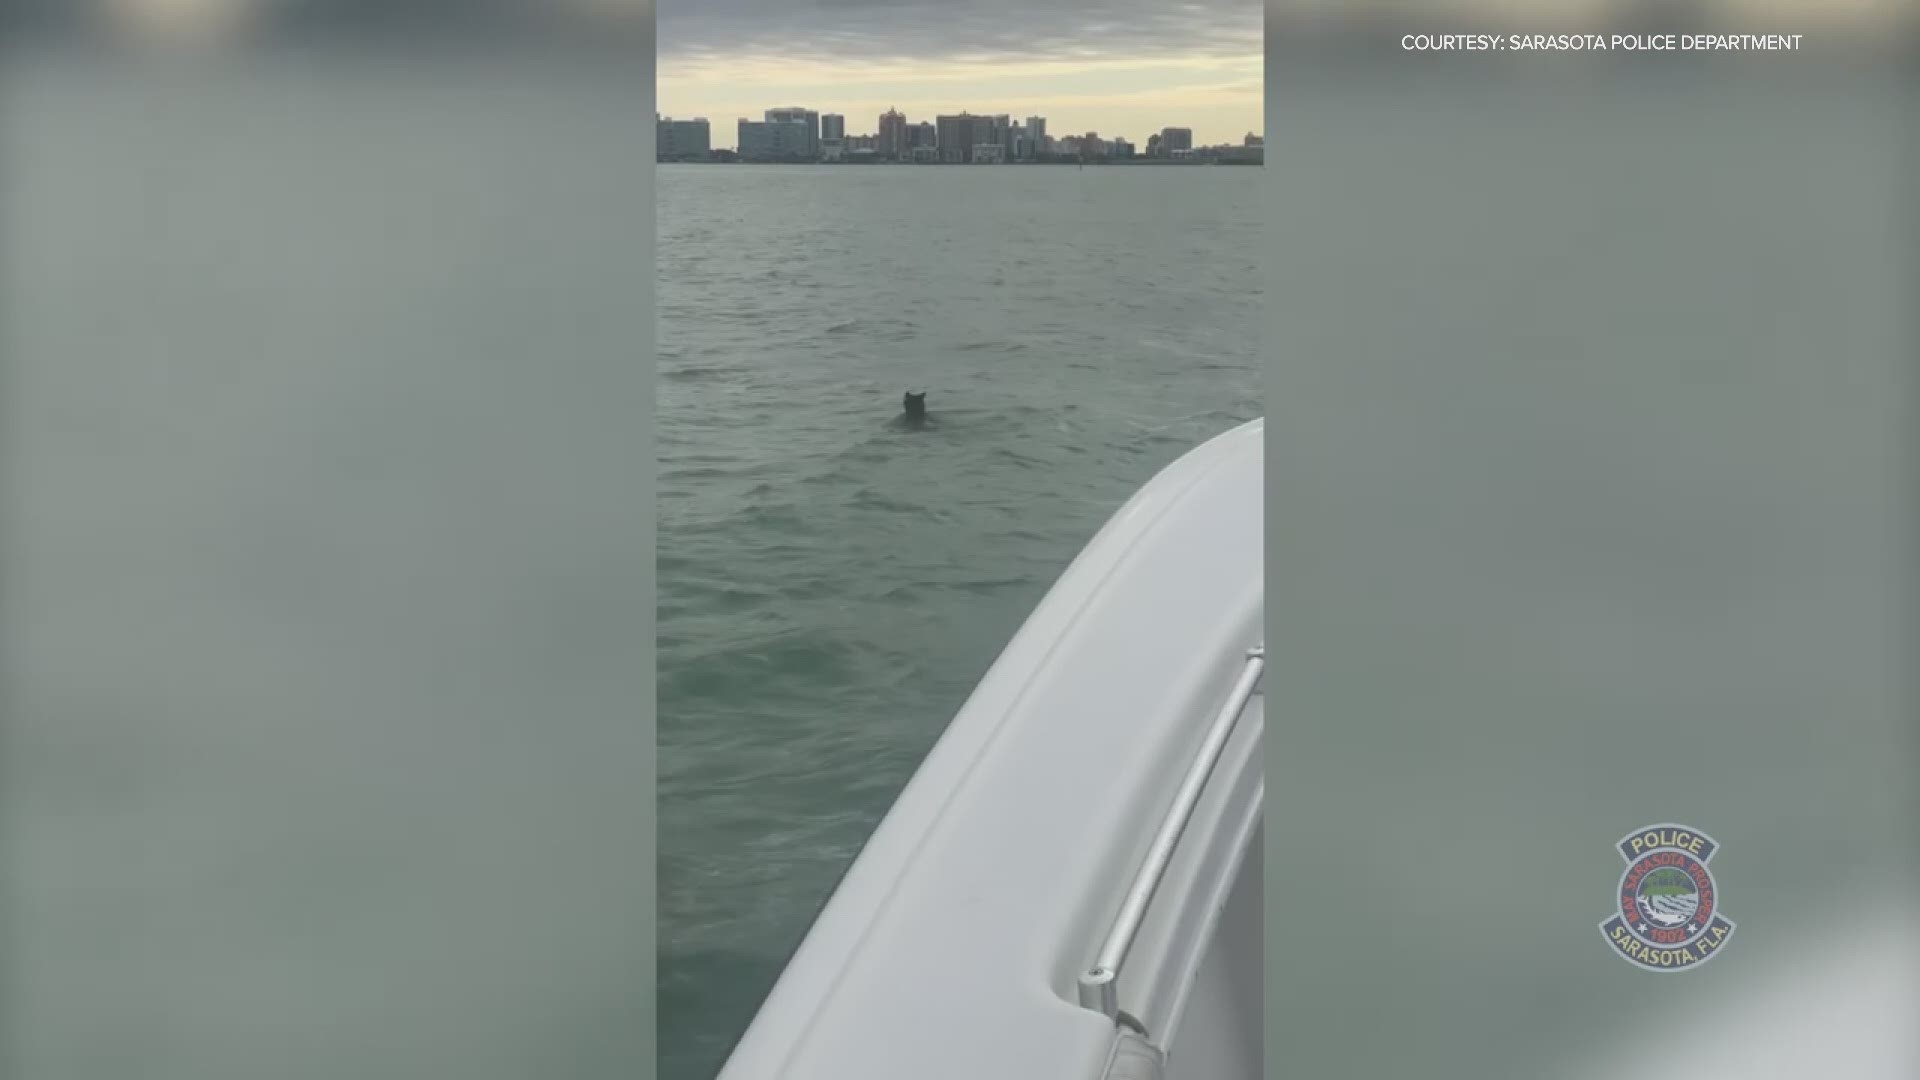 Upon closer look, that's no dog swimming in Sarasota Bay.